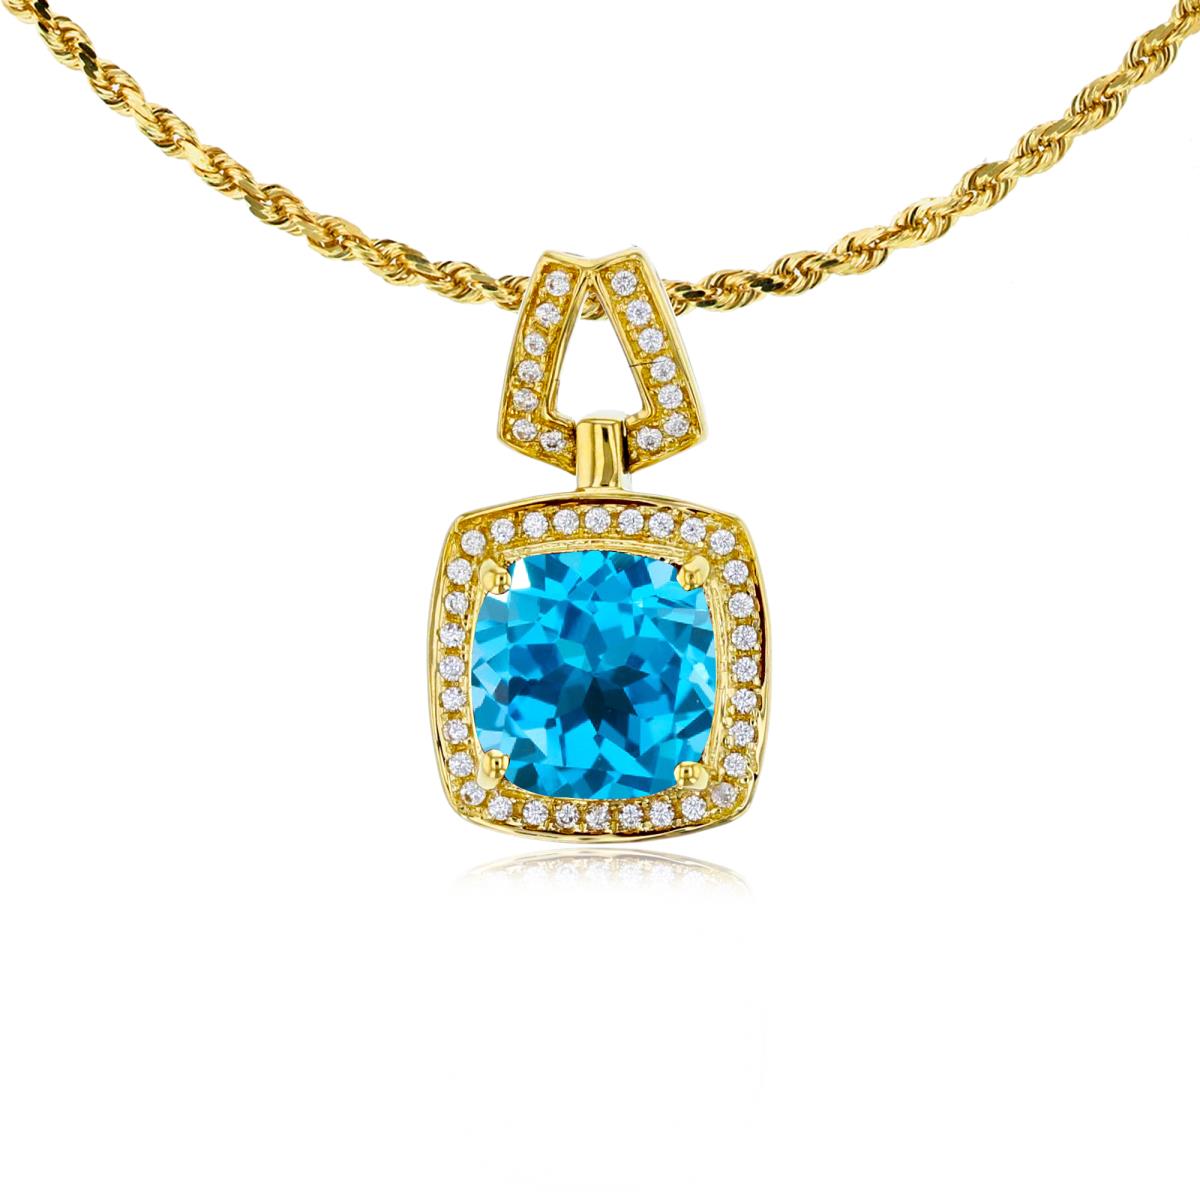 10K Yellow Gold 7mm Cushion Swiss Blue Topaz & 0.10 CTTW Diamond Halo 18" Rope Chain Necklace